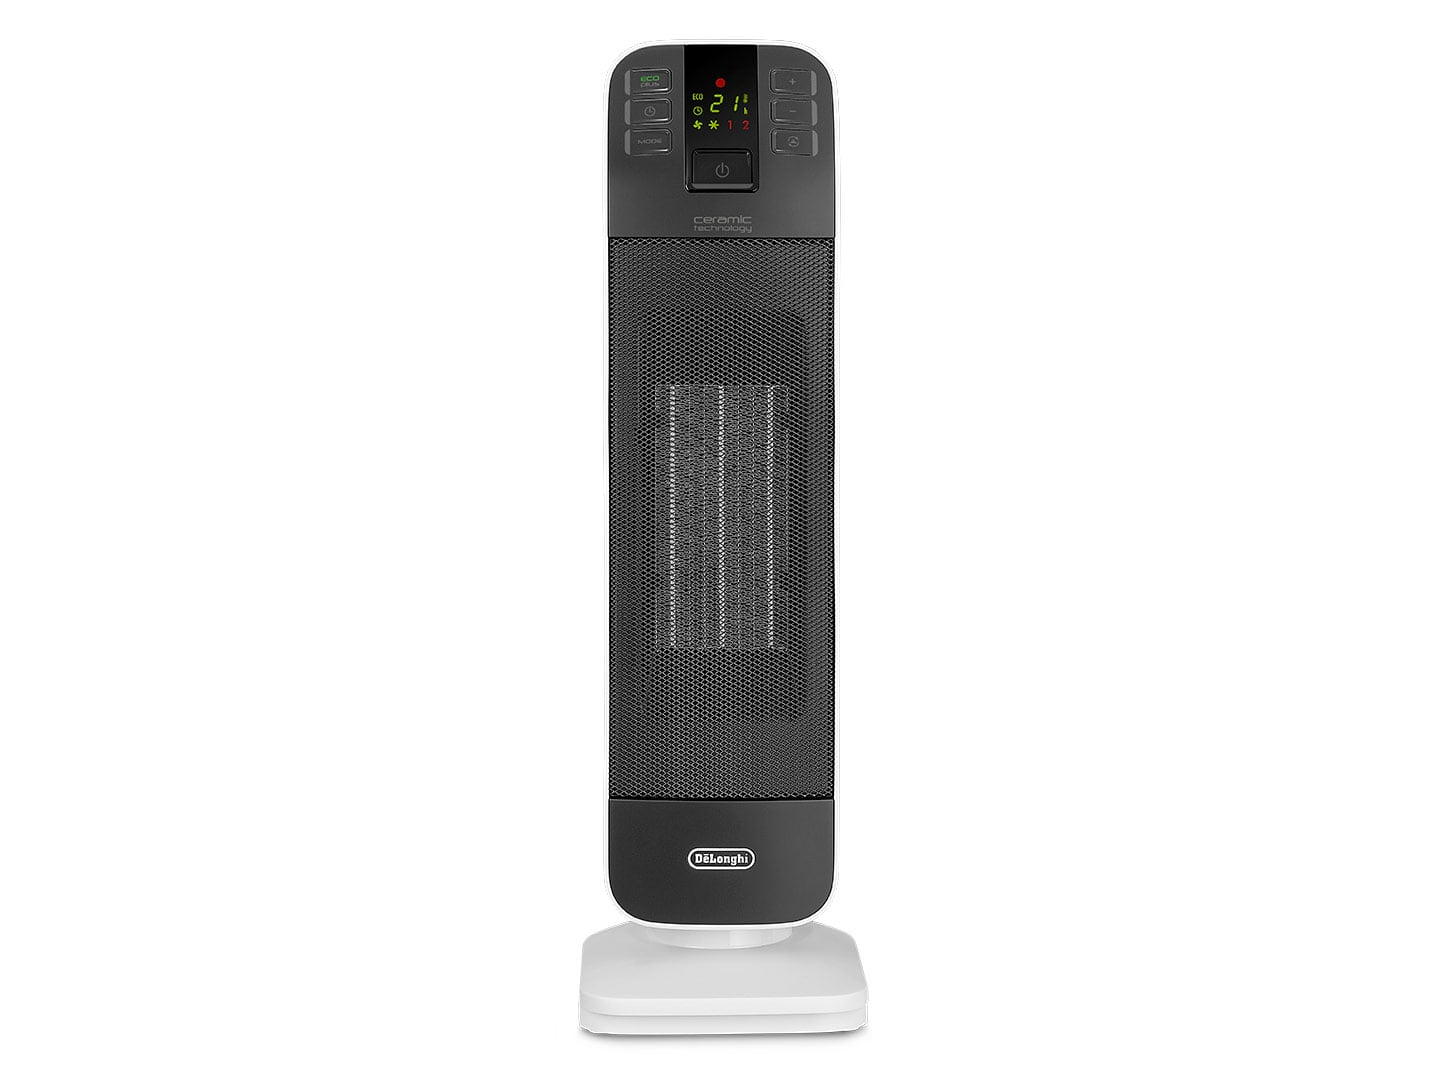 Hfx65v20 Ceramic Fan Heater Portable Heating Delonghi pertaining to proportions 1440 X 1080